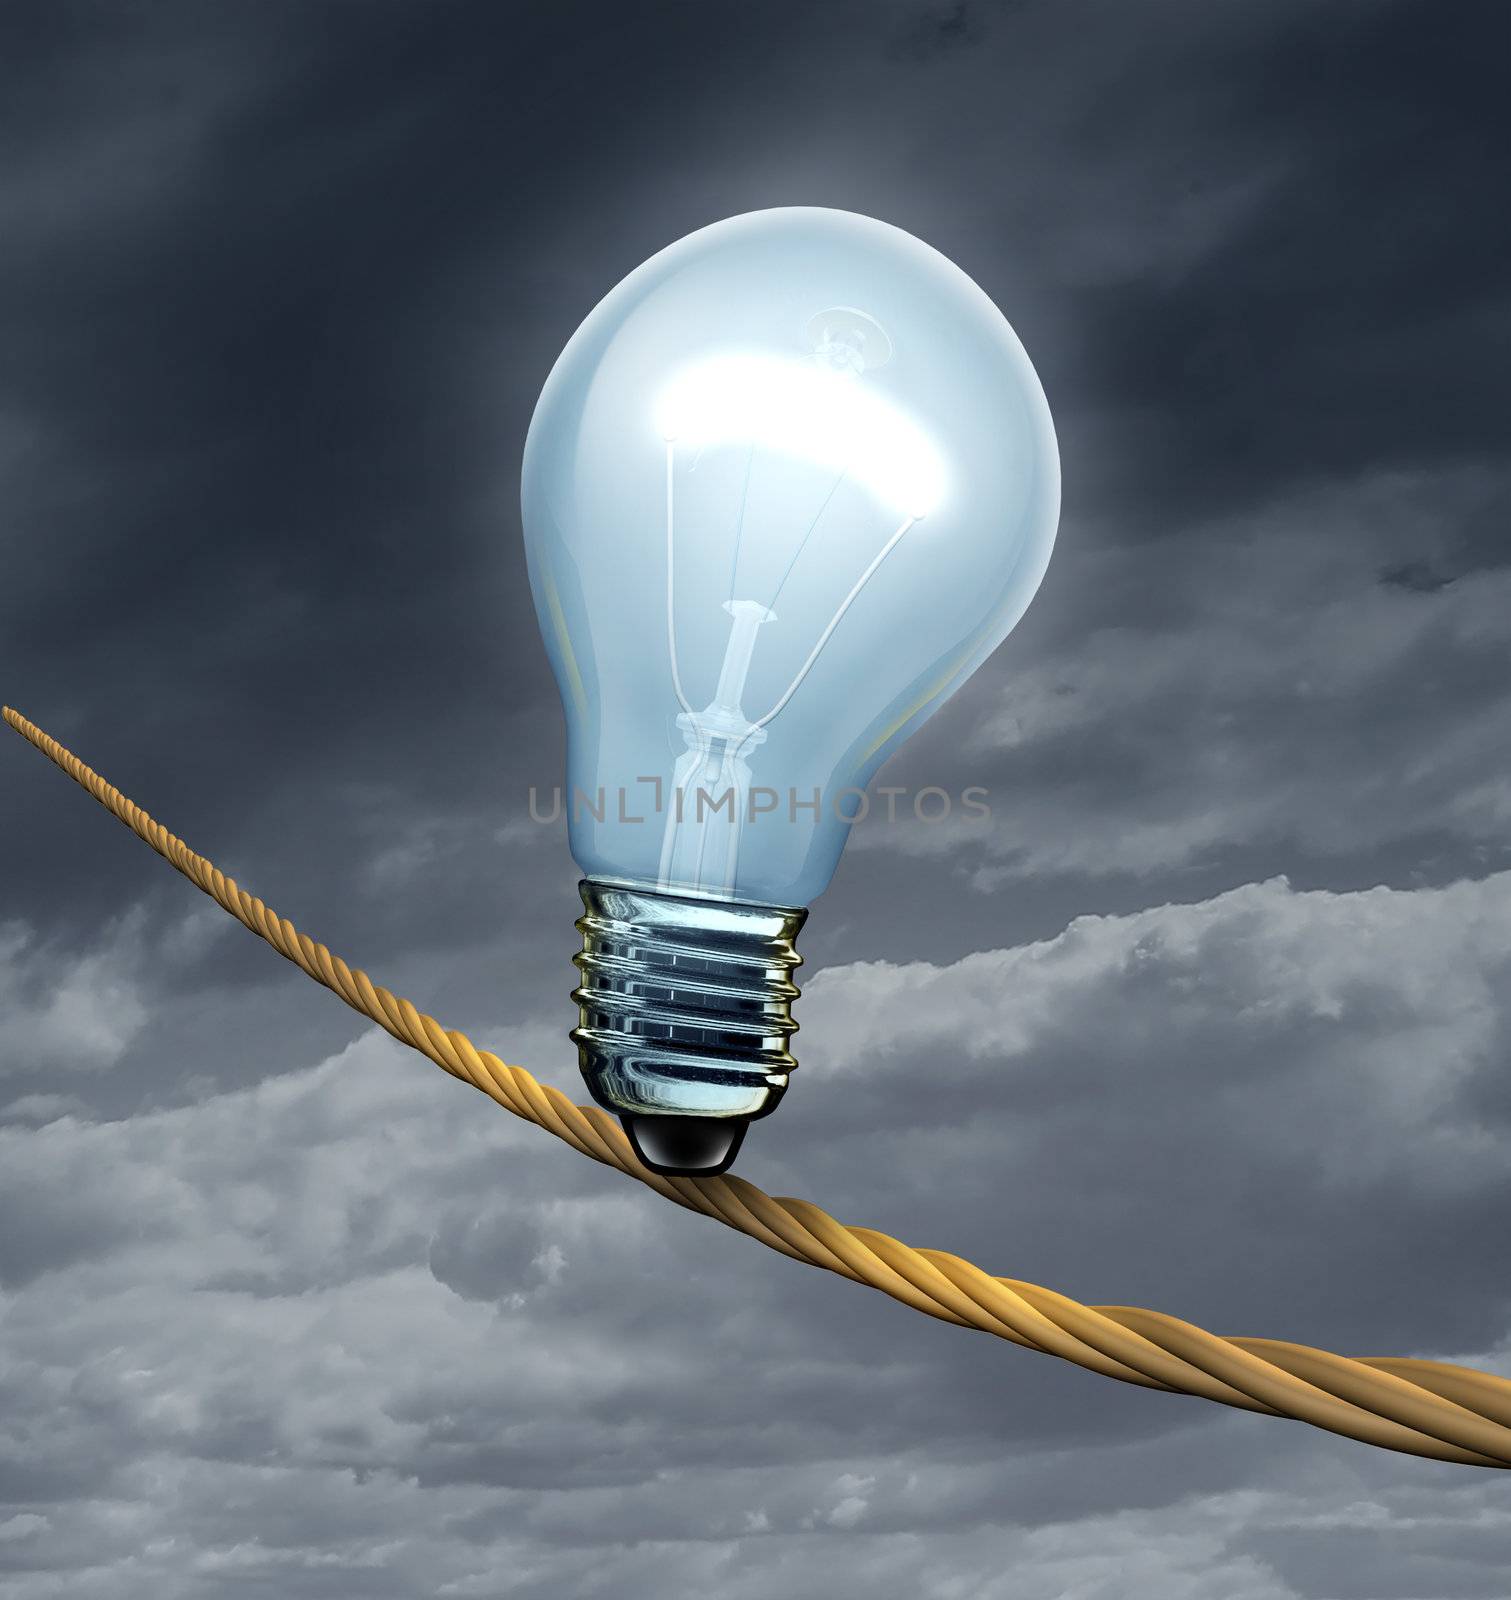 Ideas risk and the danger of failure of a new idea or innovative invention with an illuminated light bulb on a high dangerous risky tightrope on a storm sky.